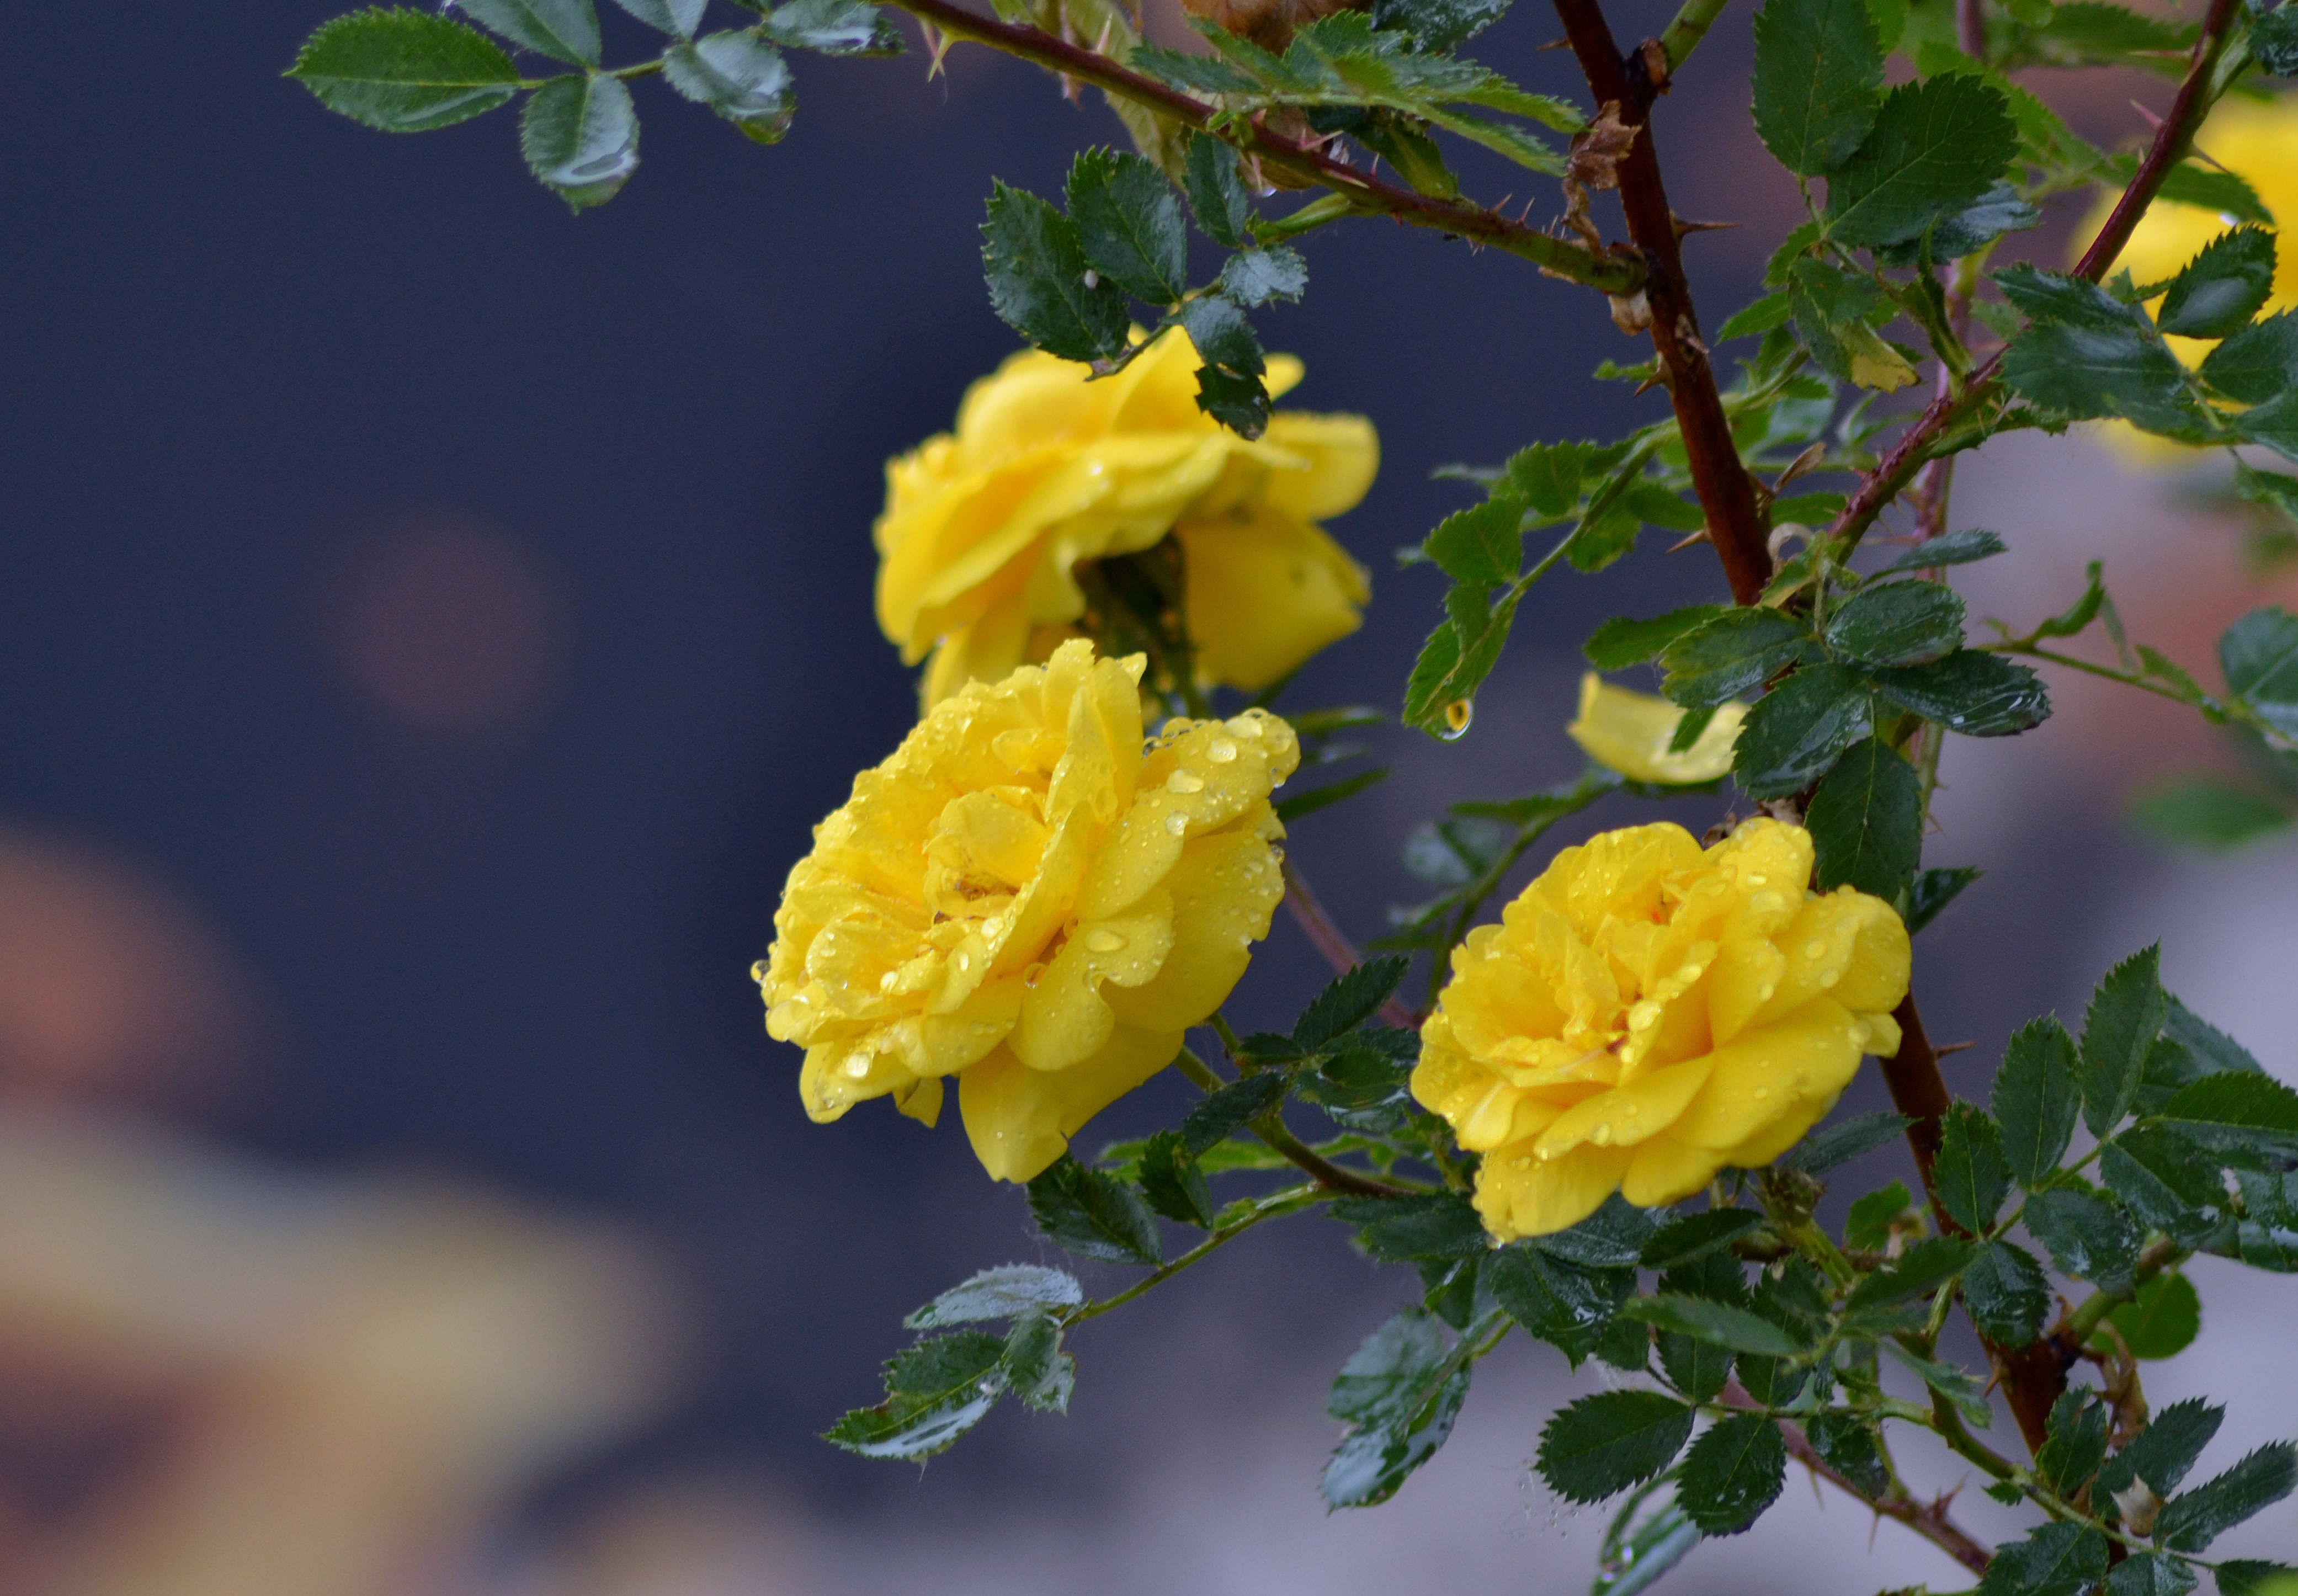 roses, flowers, drops, branch, yellow roses